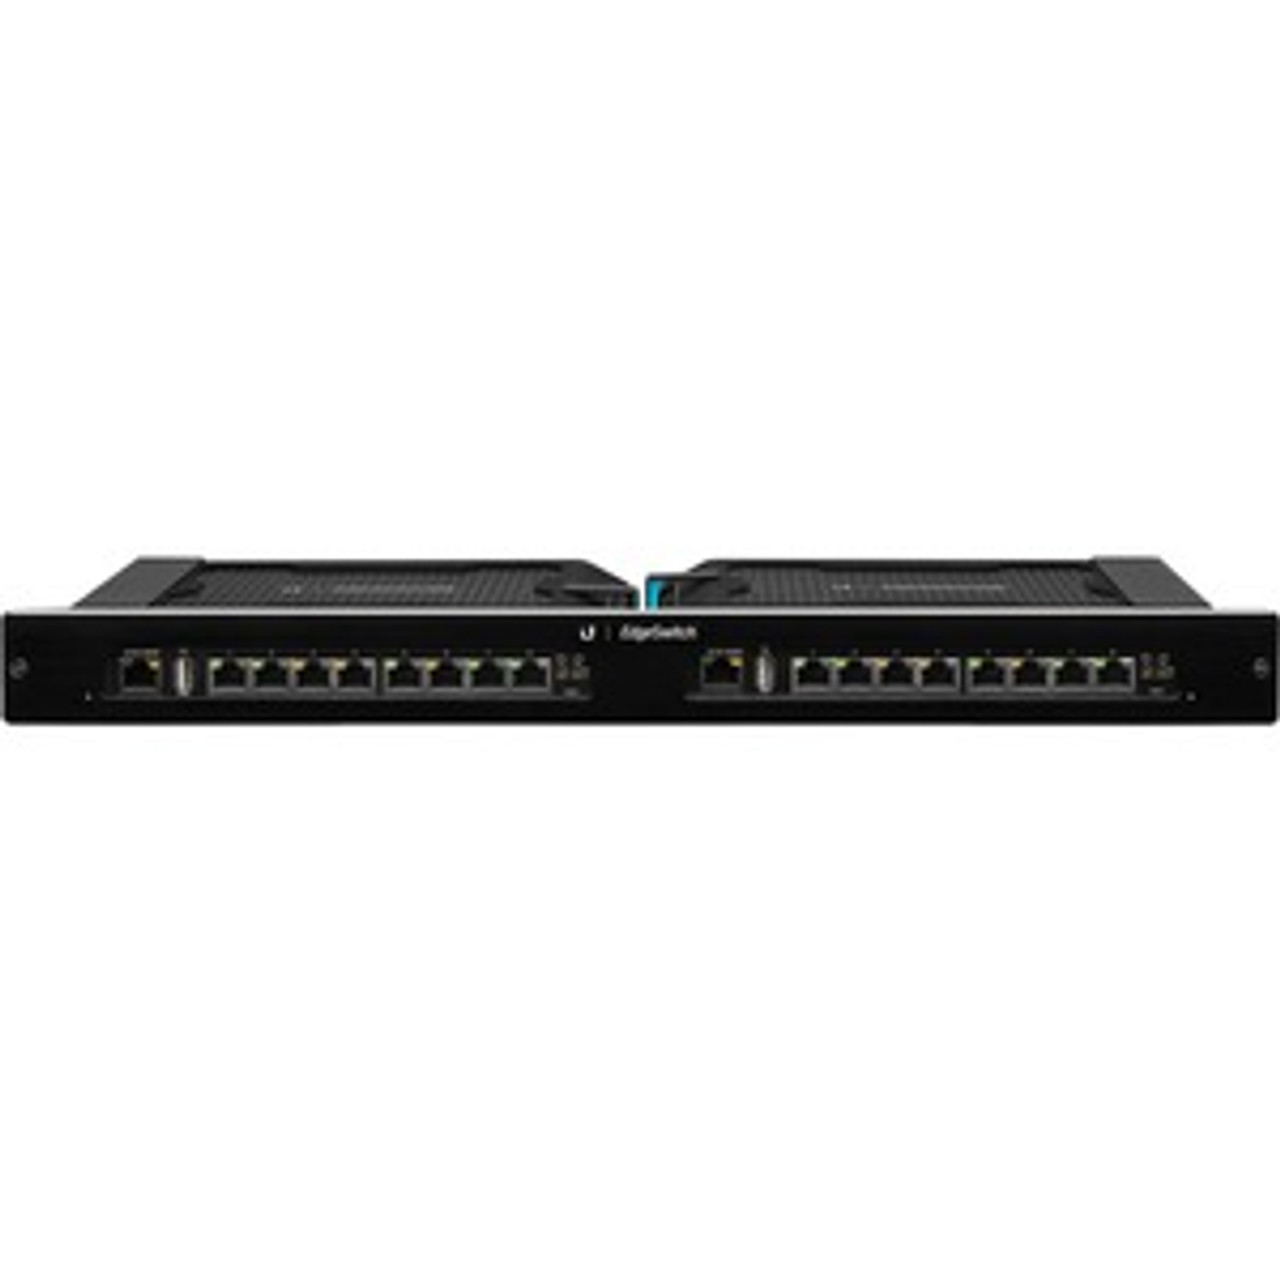 ES-16XP Ubiquiti EdgeSwitch ES-16XP Ethernet Switch - 16 Ports - Manageable - 2 Layer Supported - Twisted Pair - 1U High -  (Refurbished)